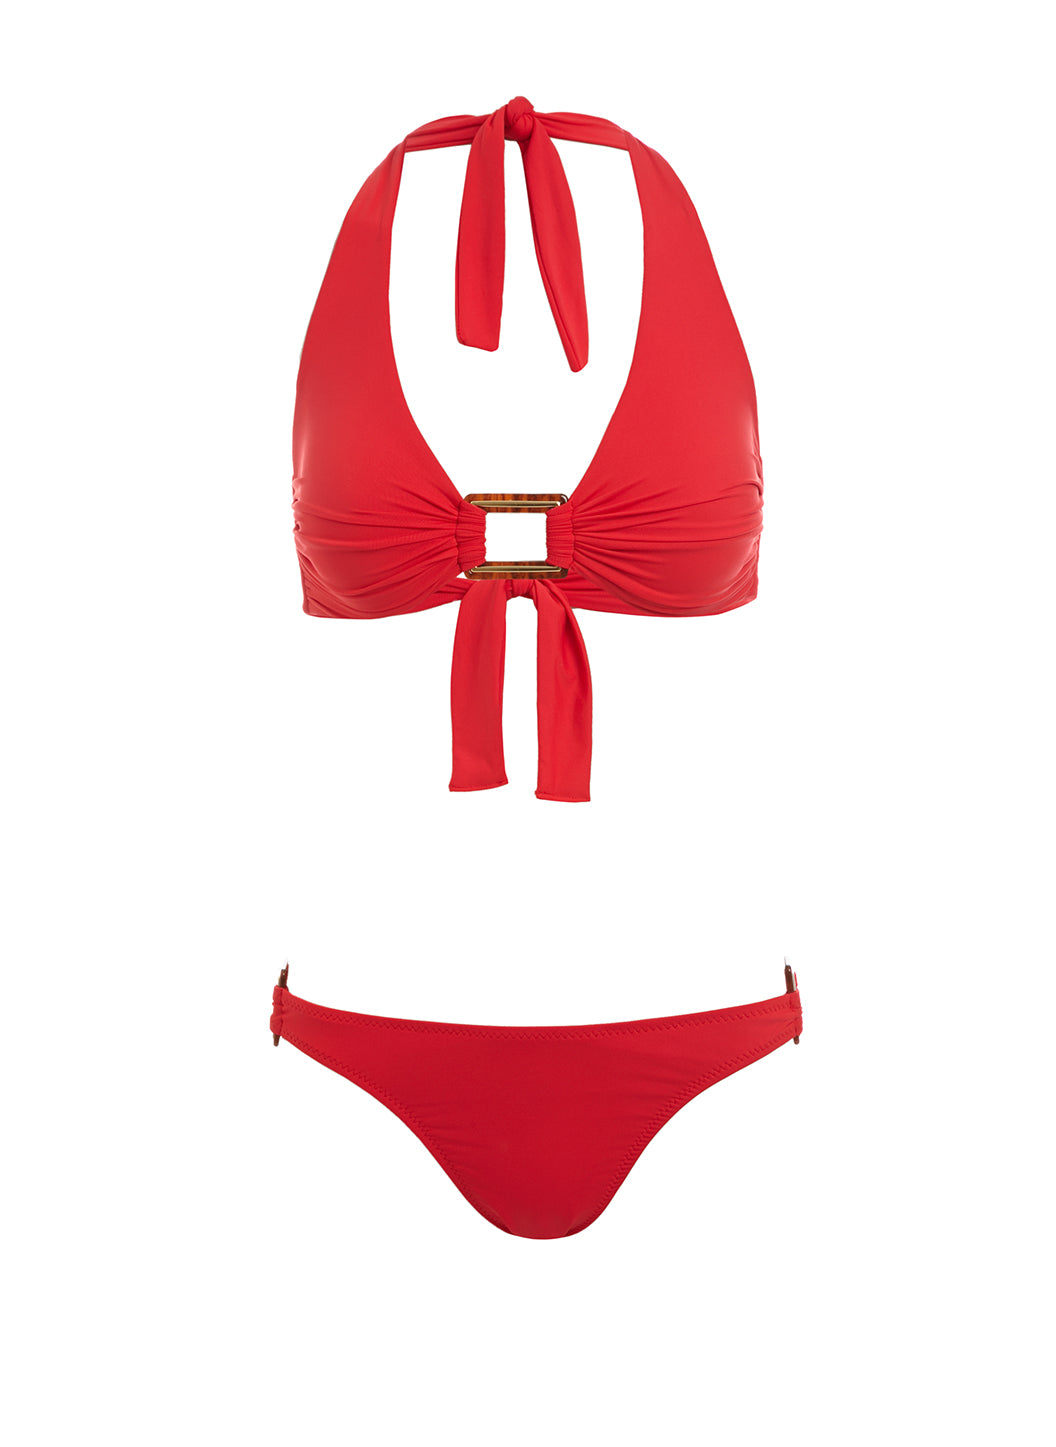 Paris Red Over The Shoulder Supportive Bikini